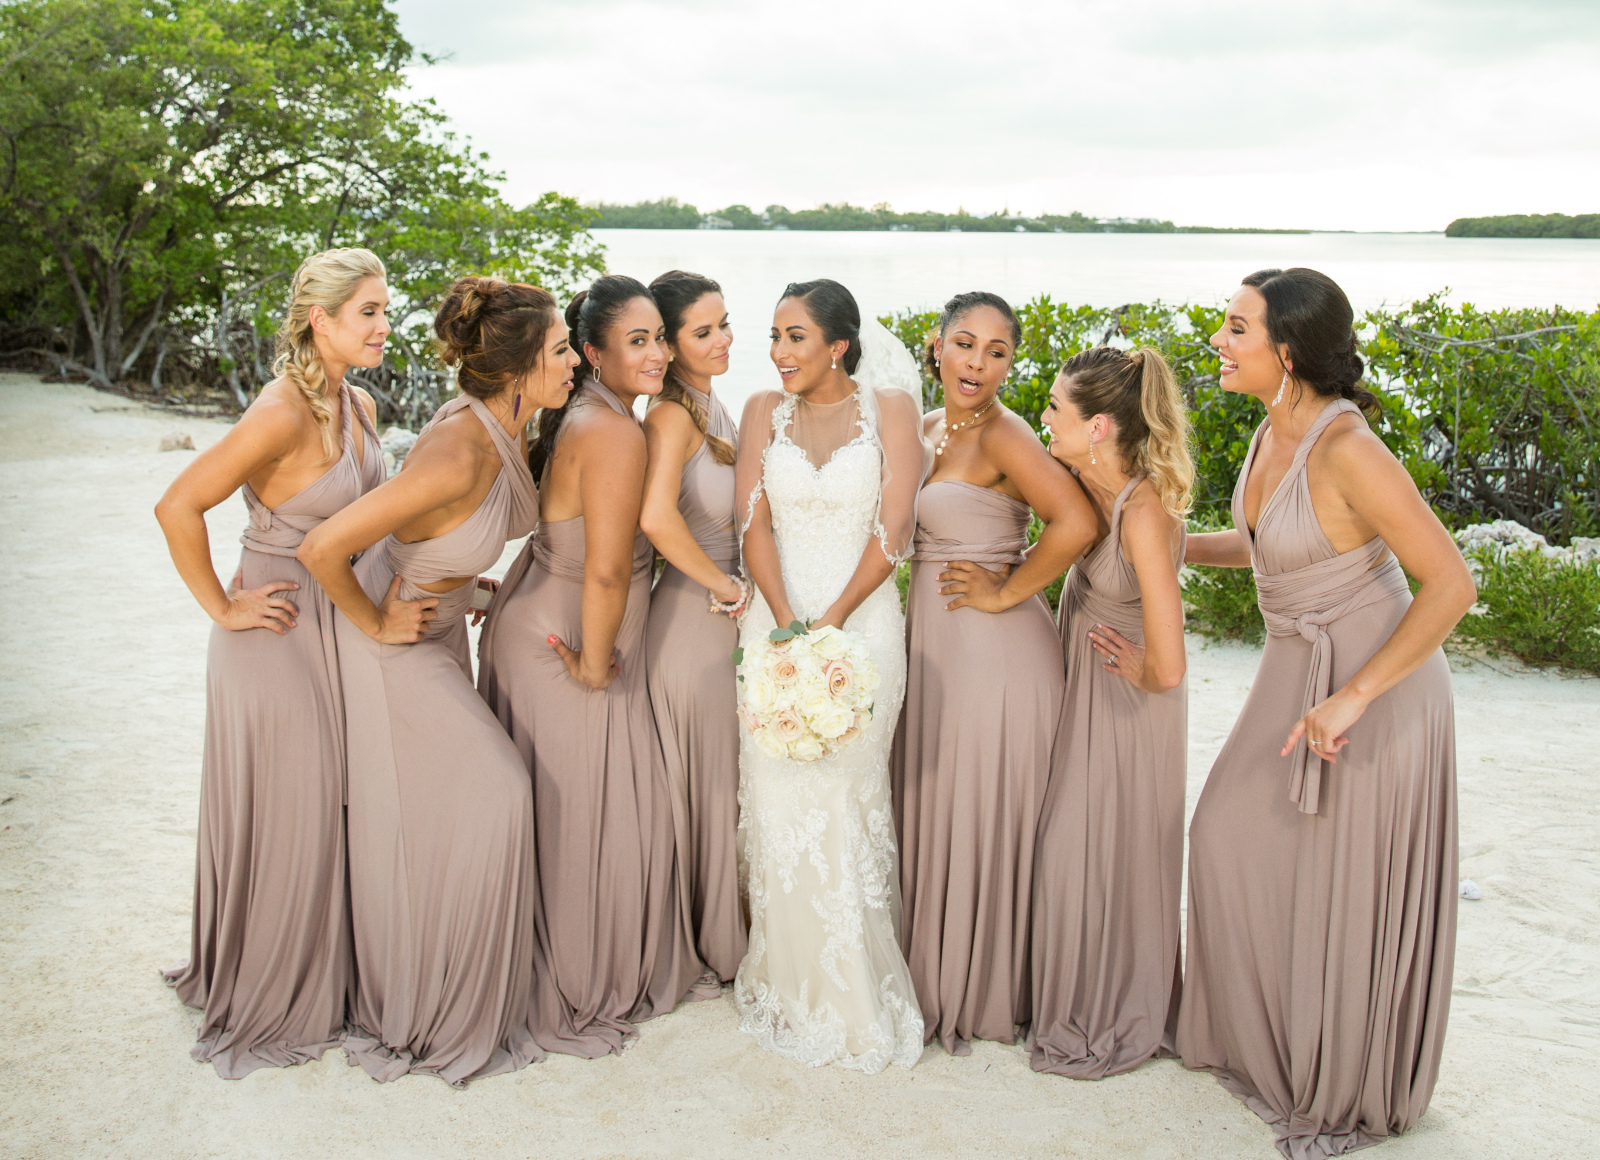 Best White Bridesmaid Dresses Beach Wedding of the decade Learn more here 